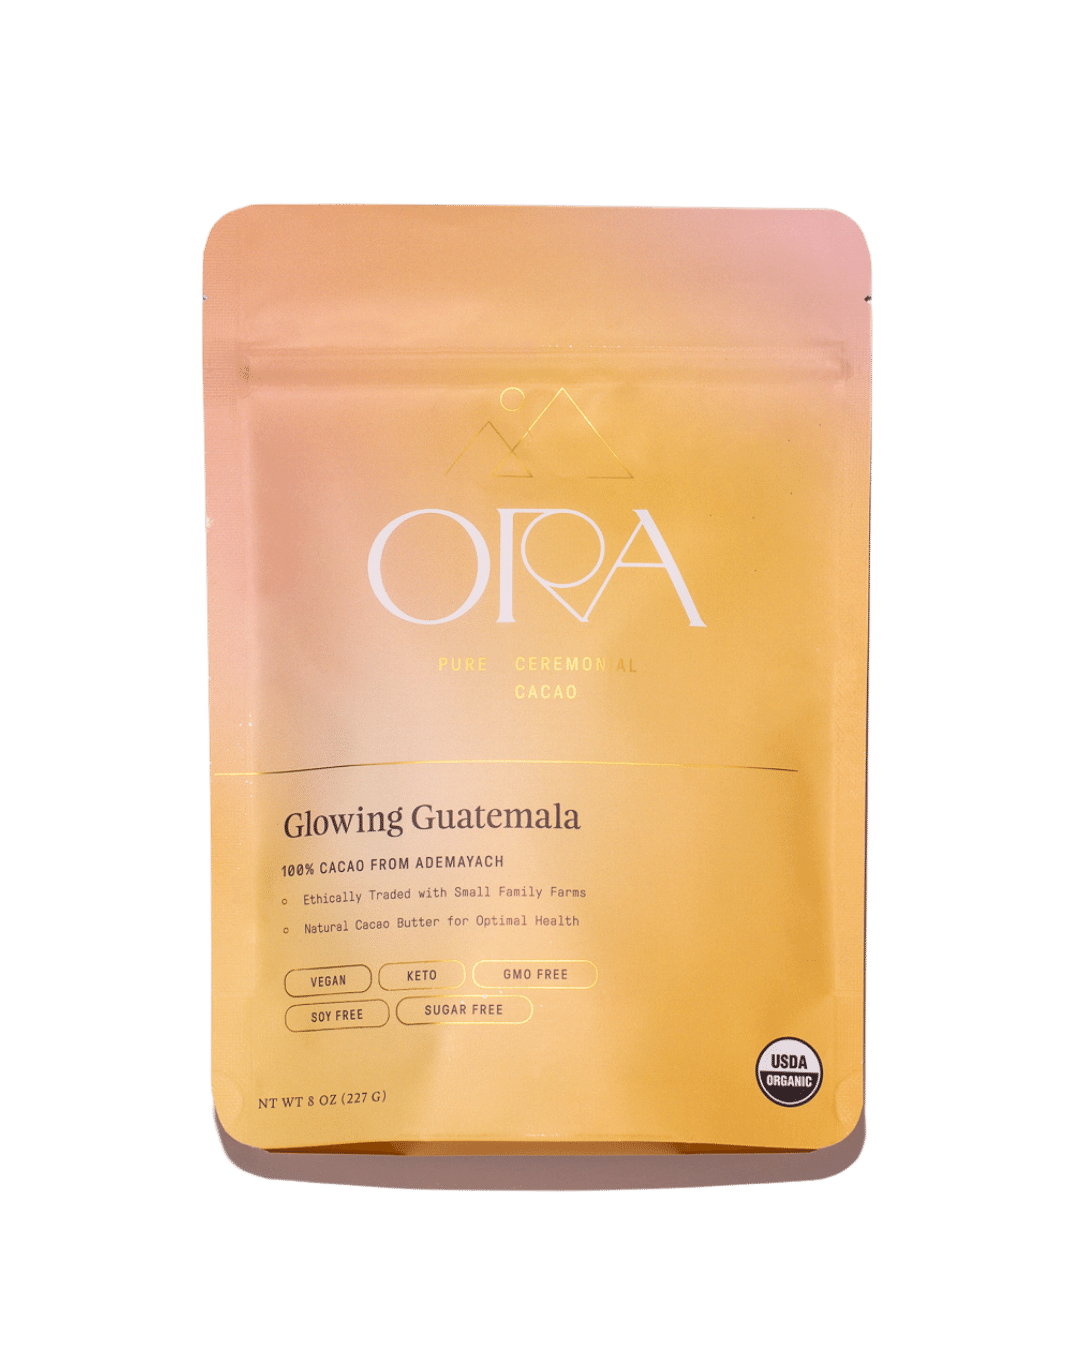 Ora Ceremonial Cacao Glowing Guatemala Front